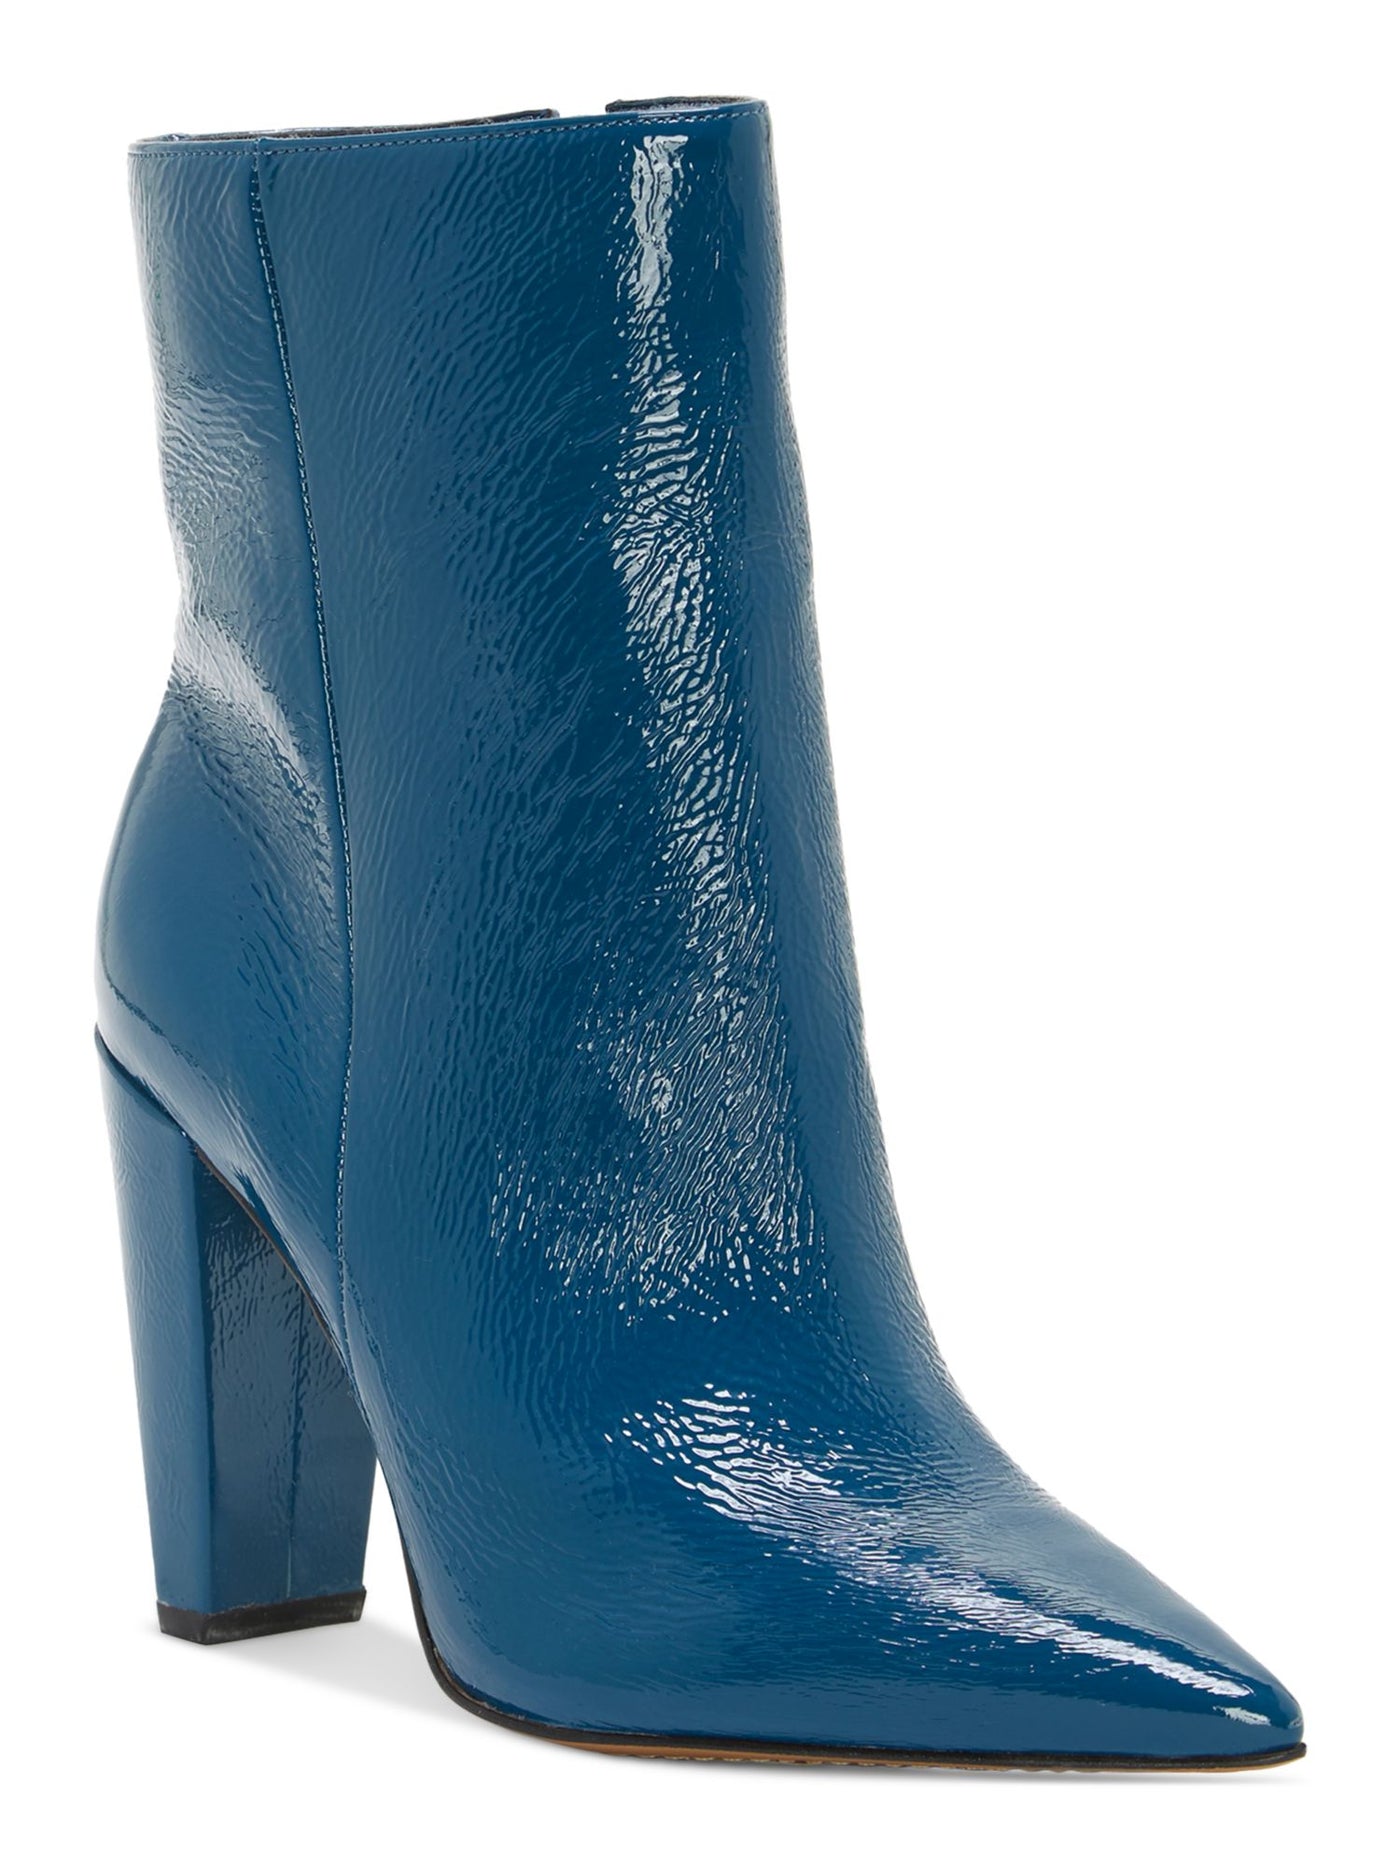 VINCE CAMUTO Womens Blue Padded Membidi Pointed Toe Cone Heel Zip-Up Leather Dress Booties 8 M